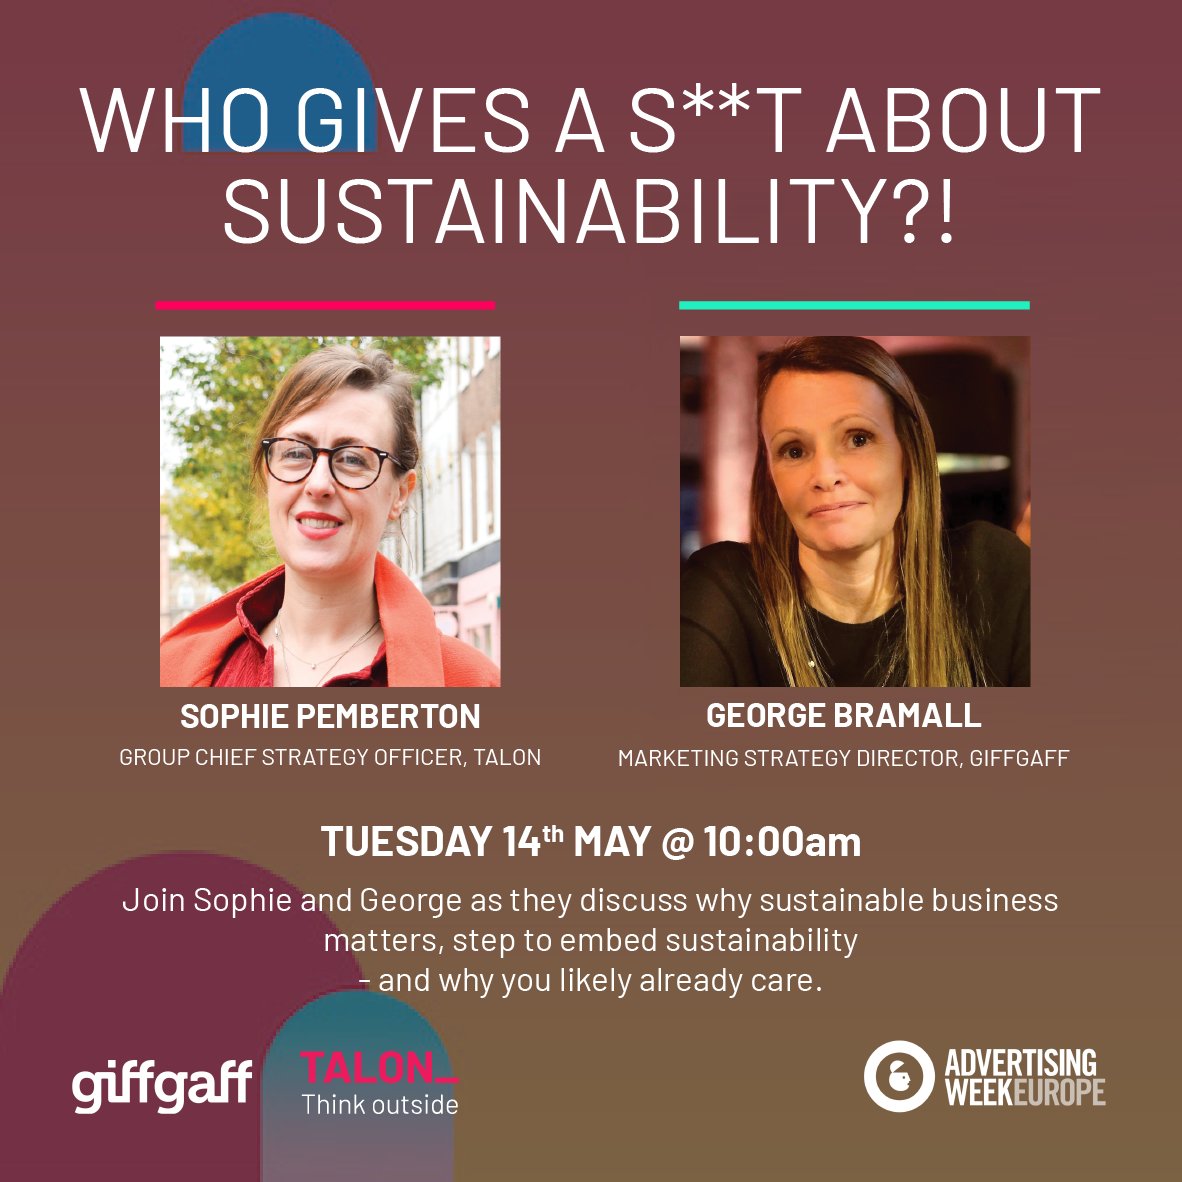 Who gives a s**t about sustainability? 🤔

Join our Group Chief Strategy Officer, Sophie Pemberton, and @giffgaff's Marketing Strategy Director, George Bramall, at @advertisingweek Europe next week as they discuss why sustainable business matters.